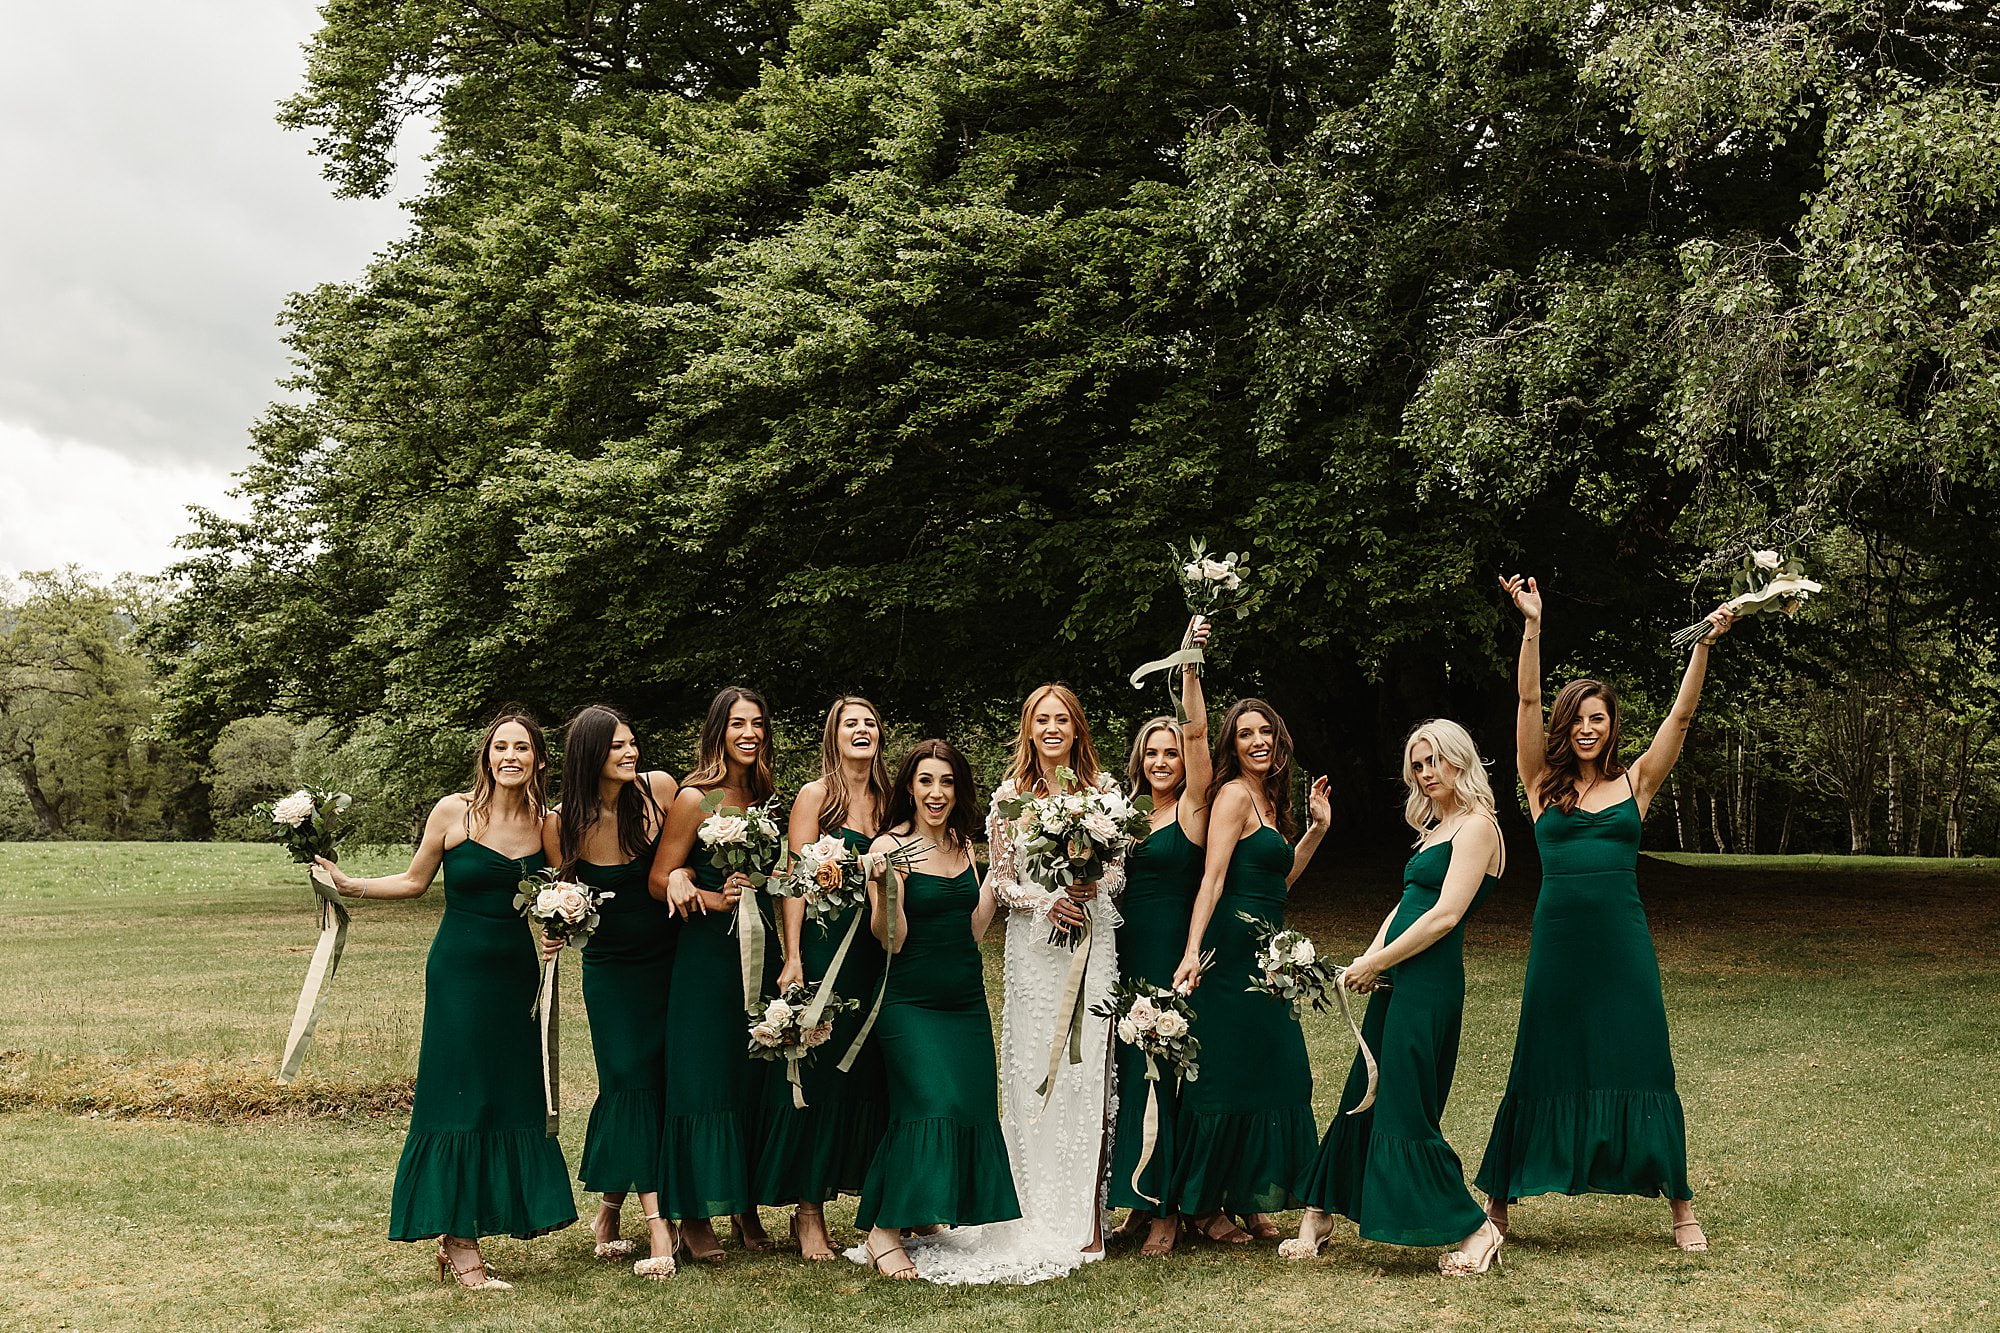 raemoir house wedding photography group photo casual hays flowers bridesmaids green dresses outdoors